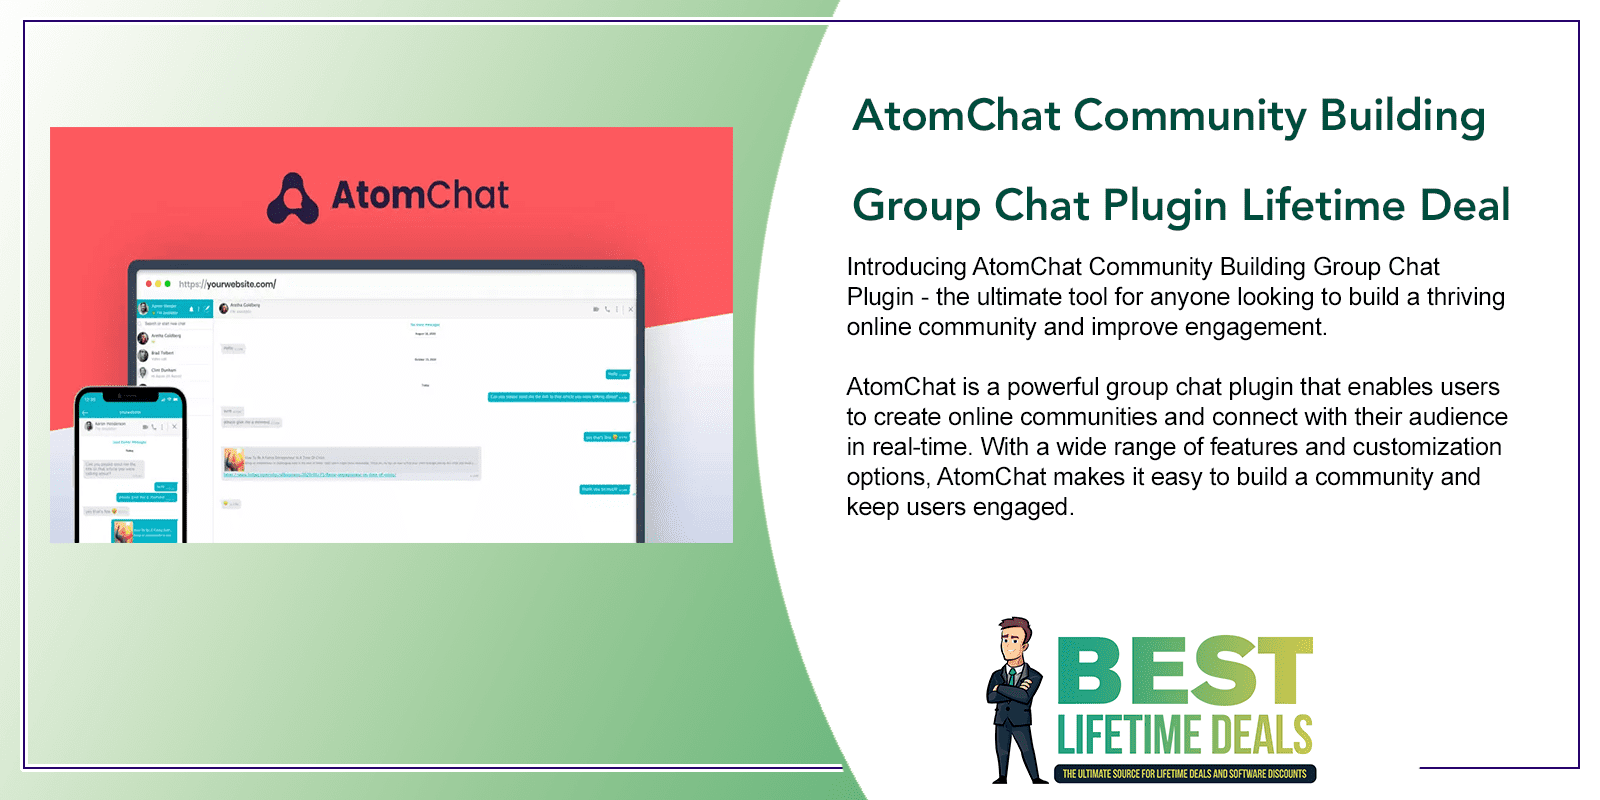 AtomChat Community Building Group Chat Plugin Lifetime Deal Featured Image